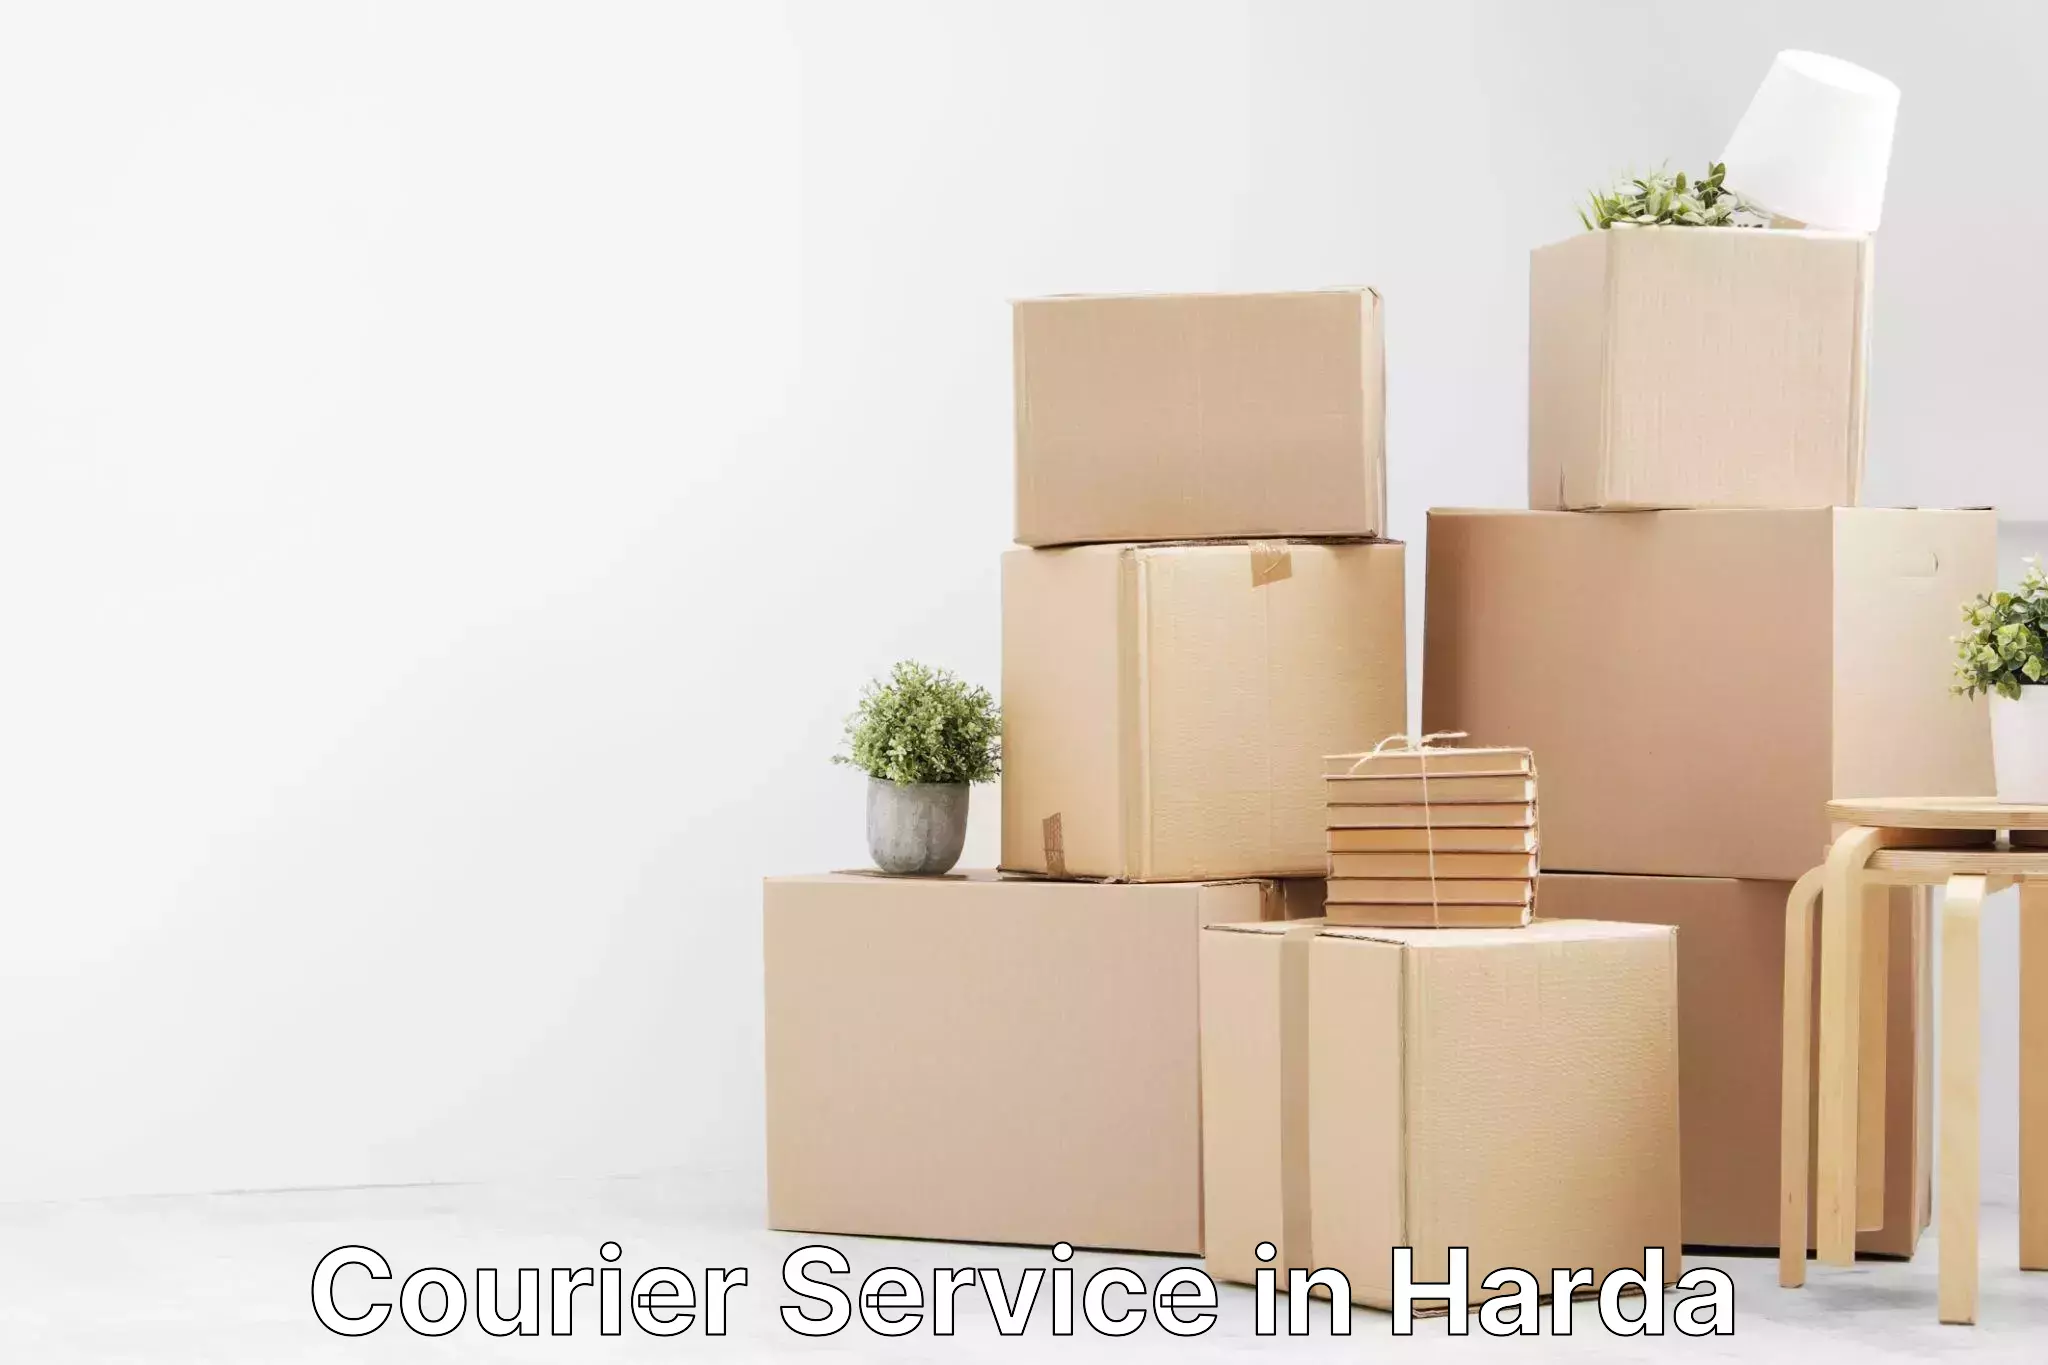 Customer-oriented courier services in Harda